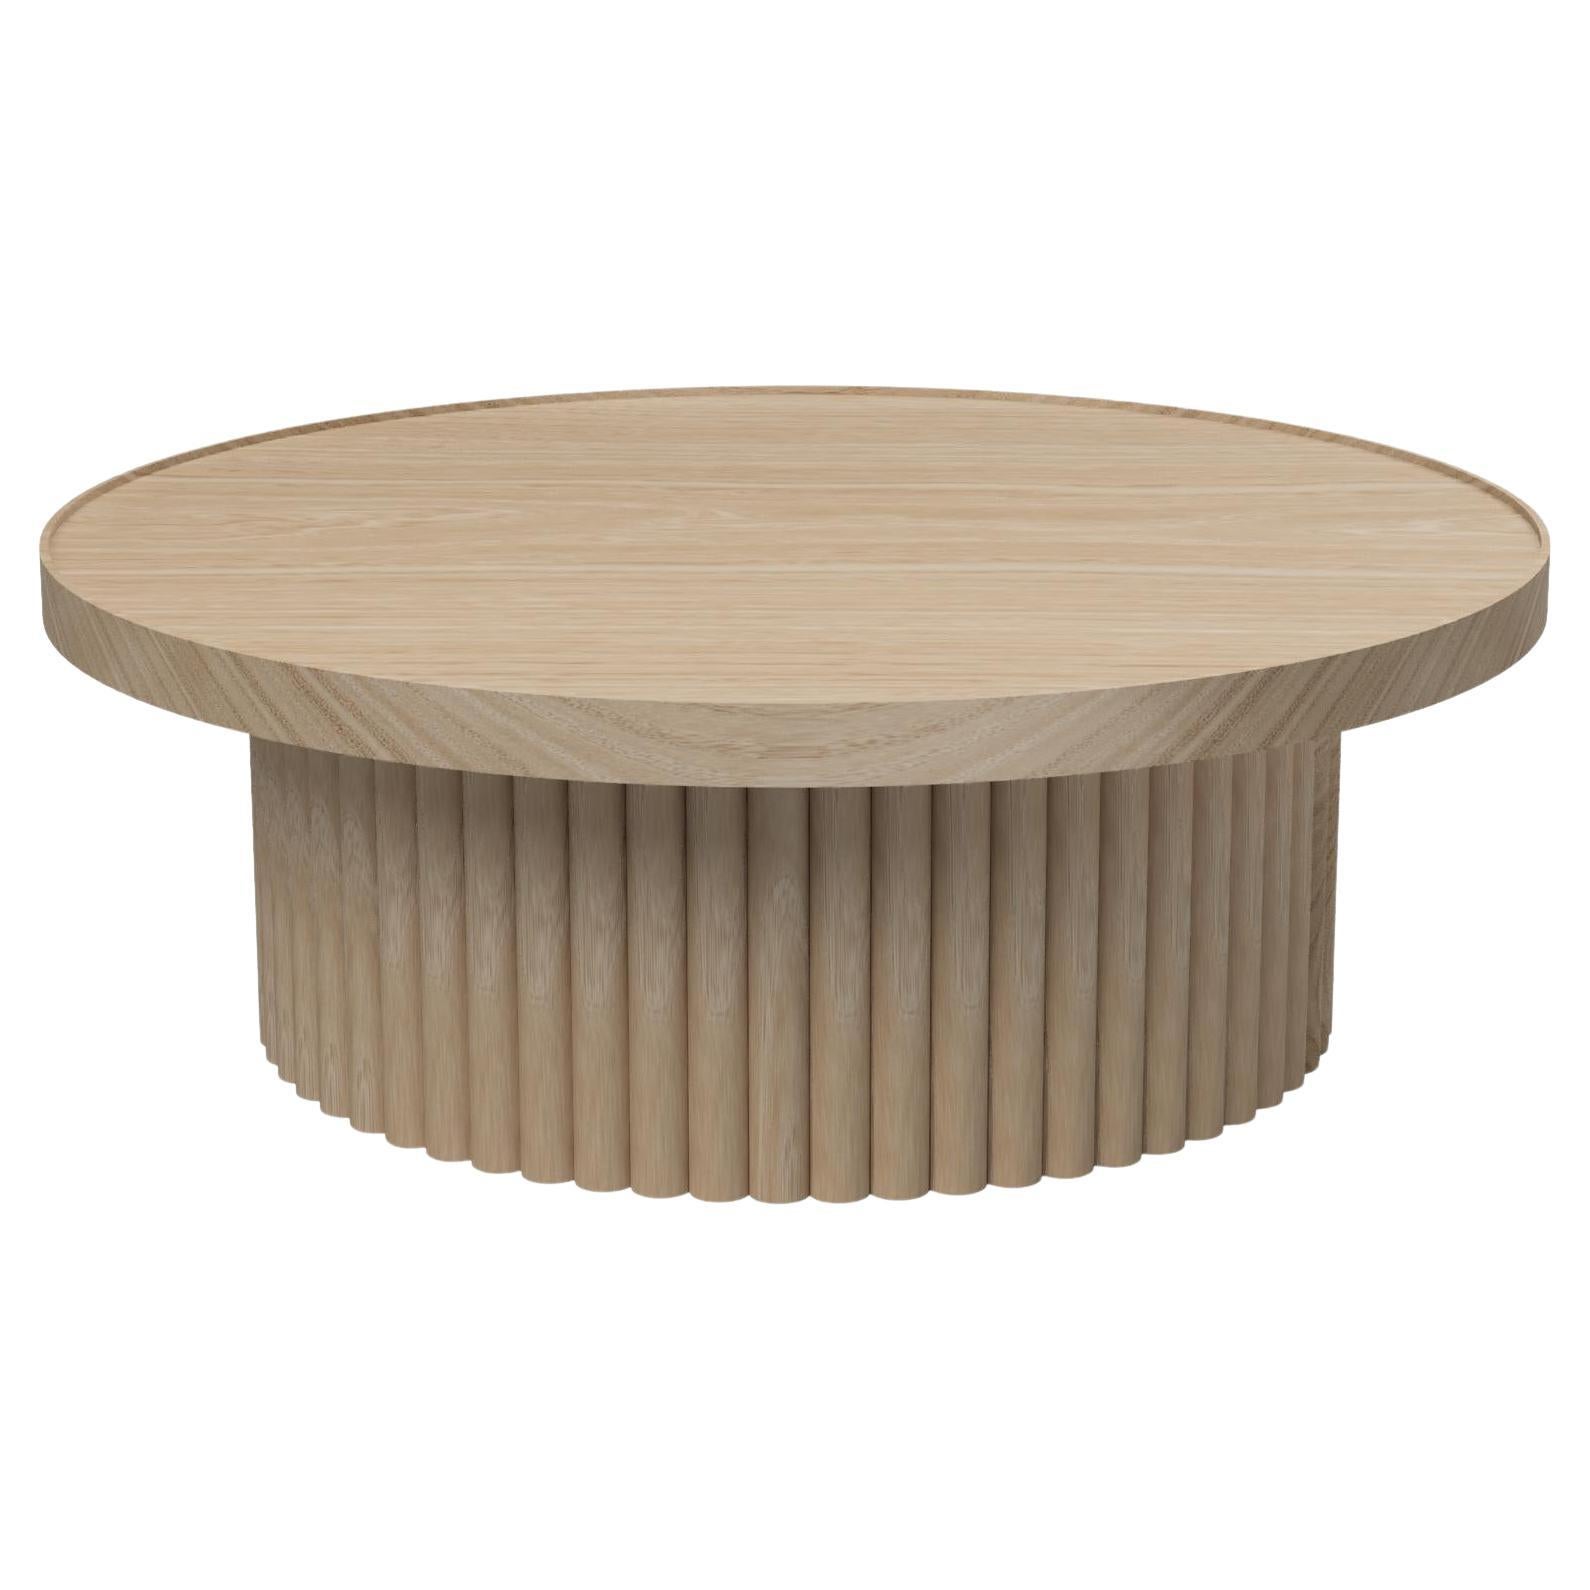 Modern White Ash Loki Coffee Table from the Signature Series by Pompous Fox